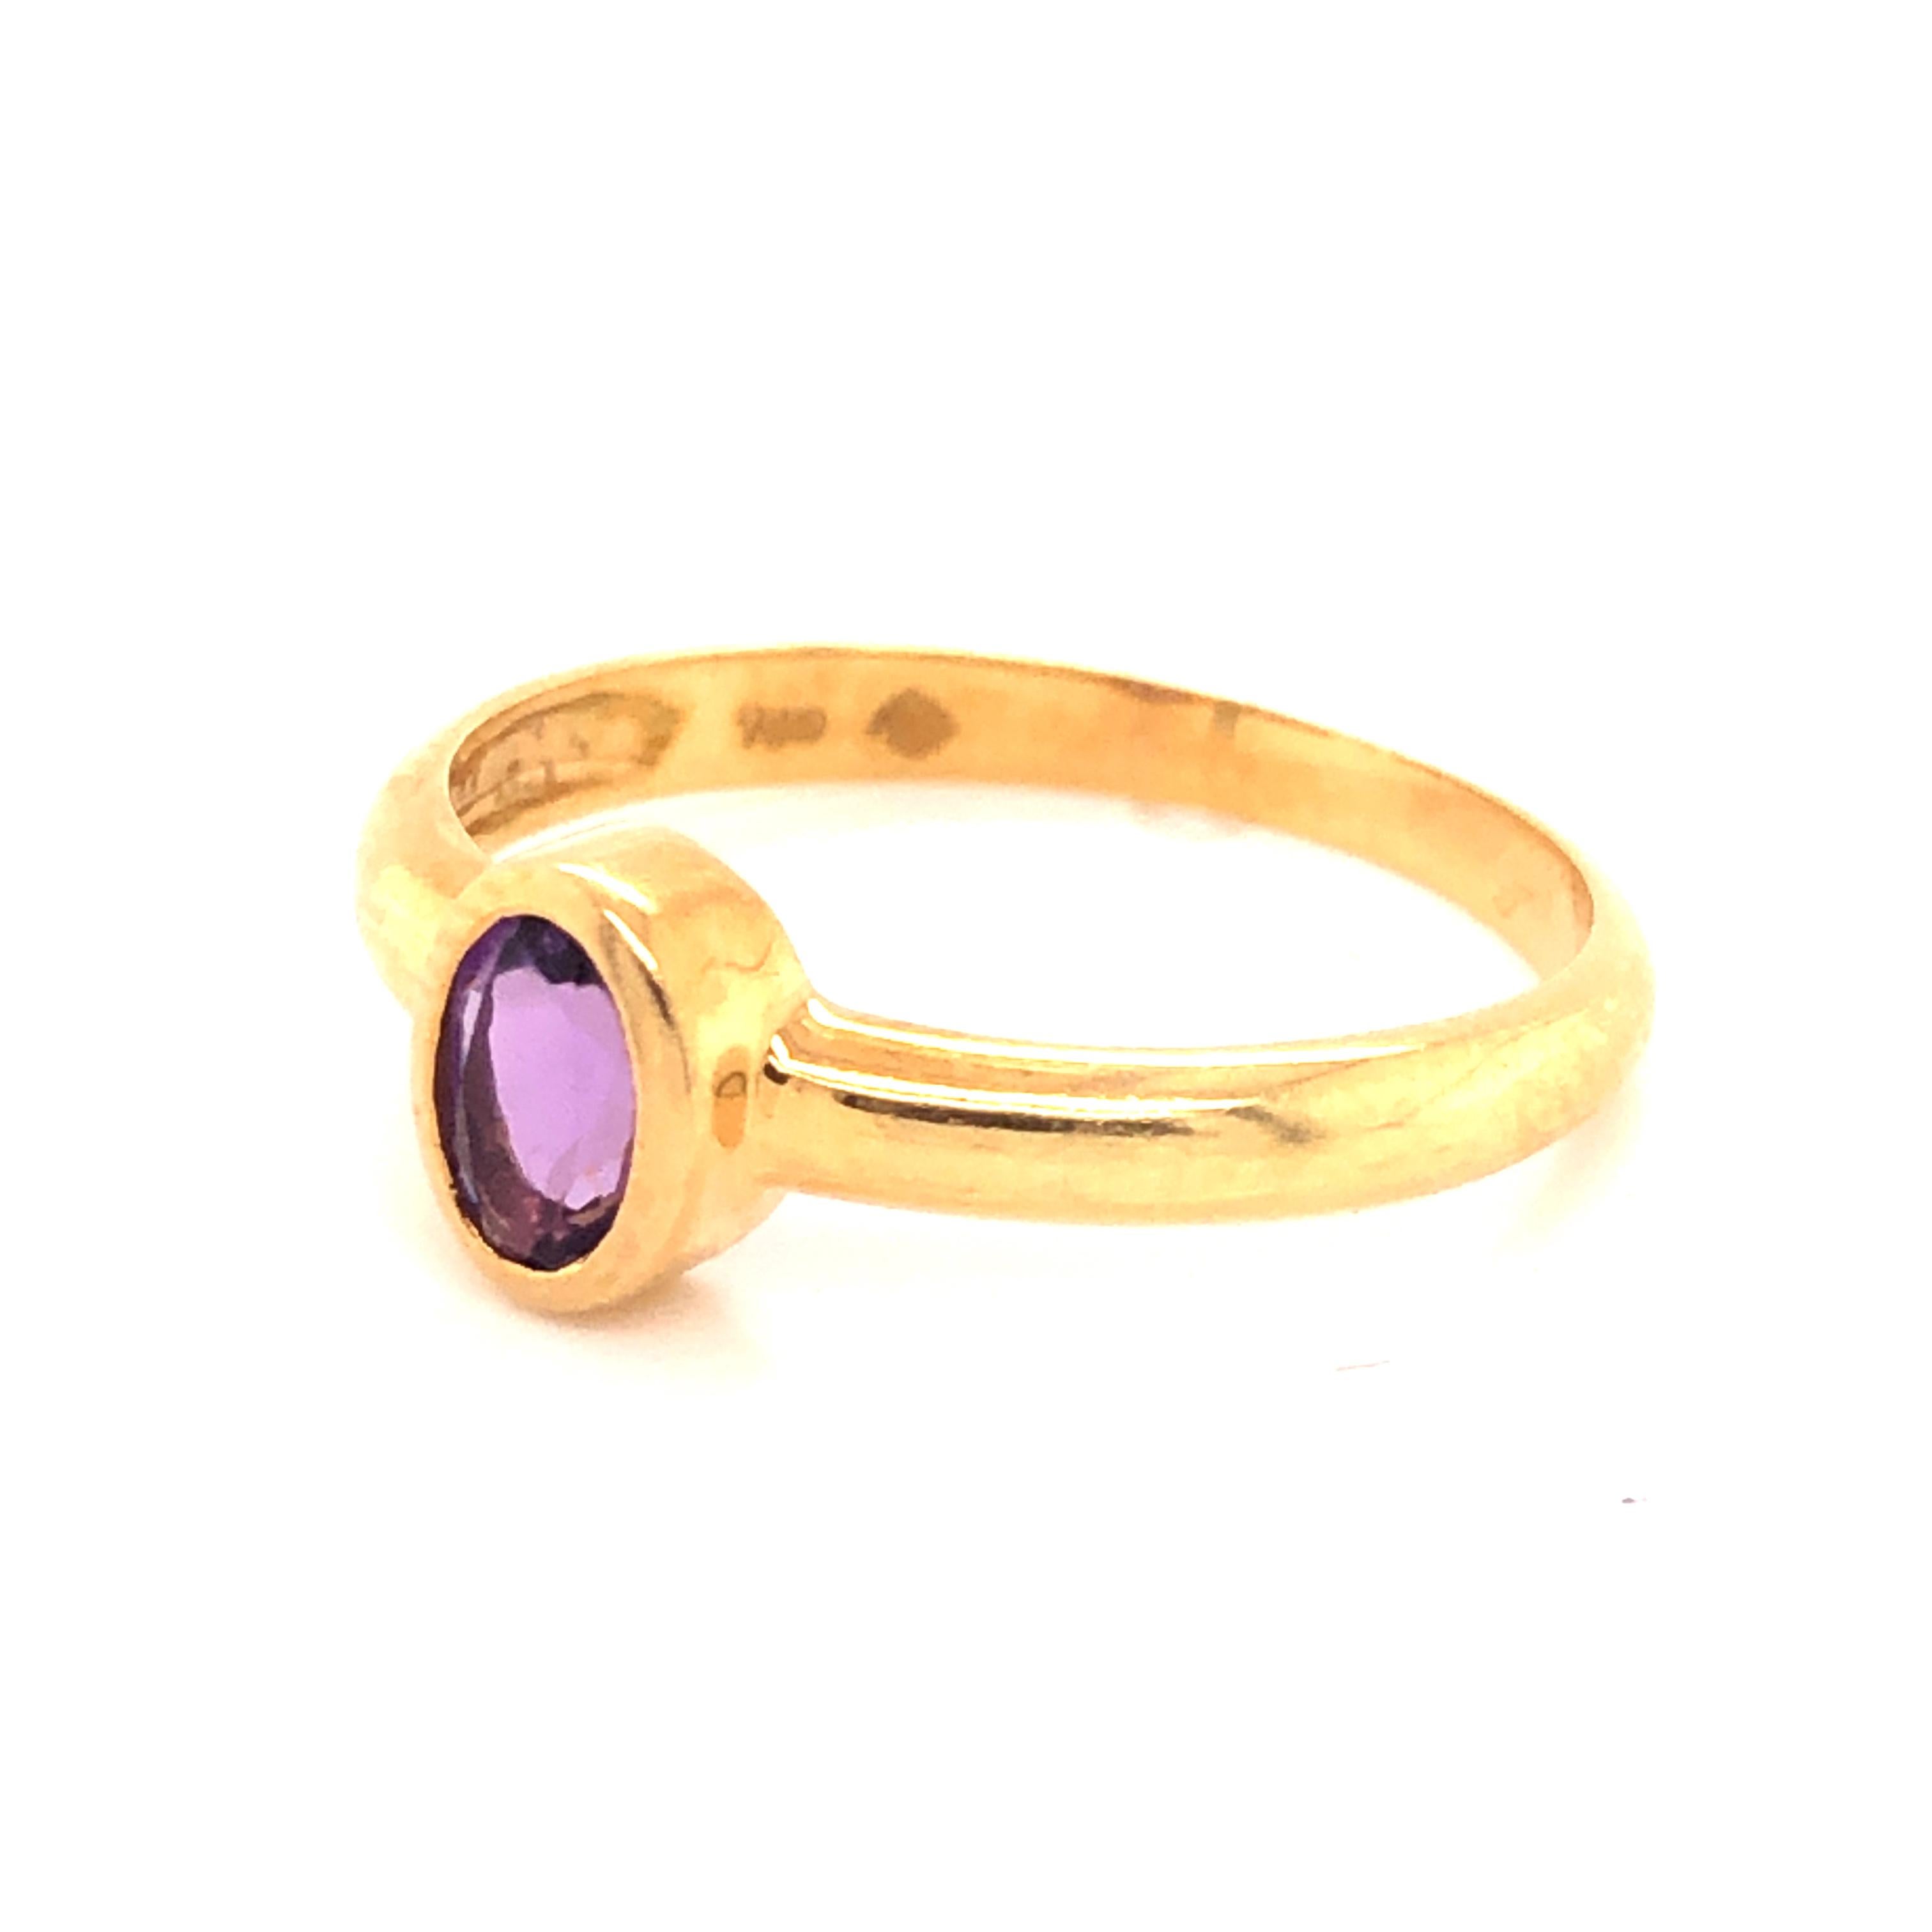 Beautiful ring from famed designer H. Stern crafted in 18k yellow gold. This beautiful ring has one oval cut Amethyst gemstone bezel set with a vivid purple color. The ring is in excellent condition and has recently been polished by our in house